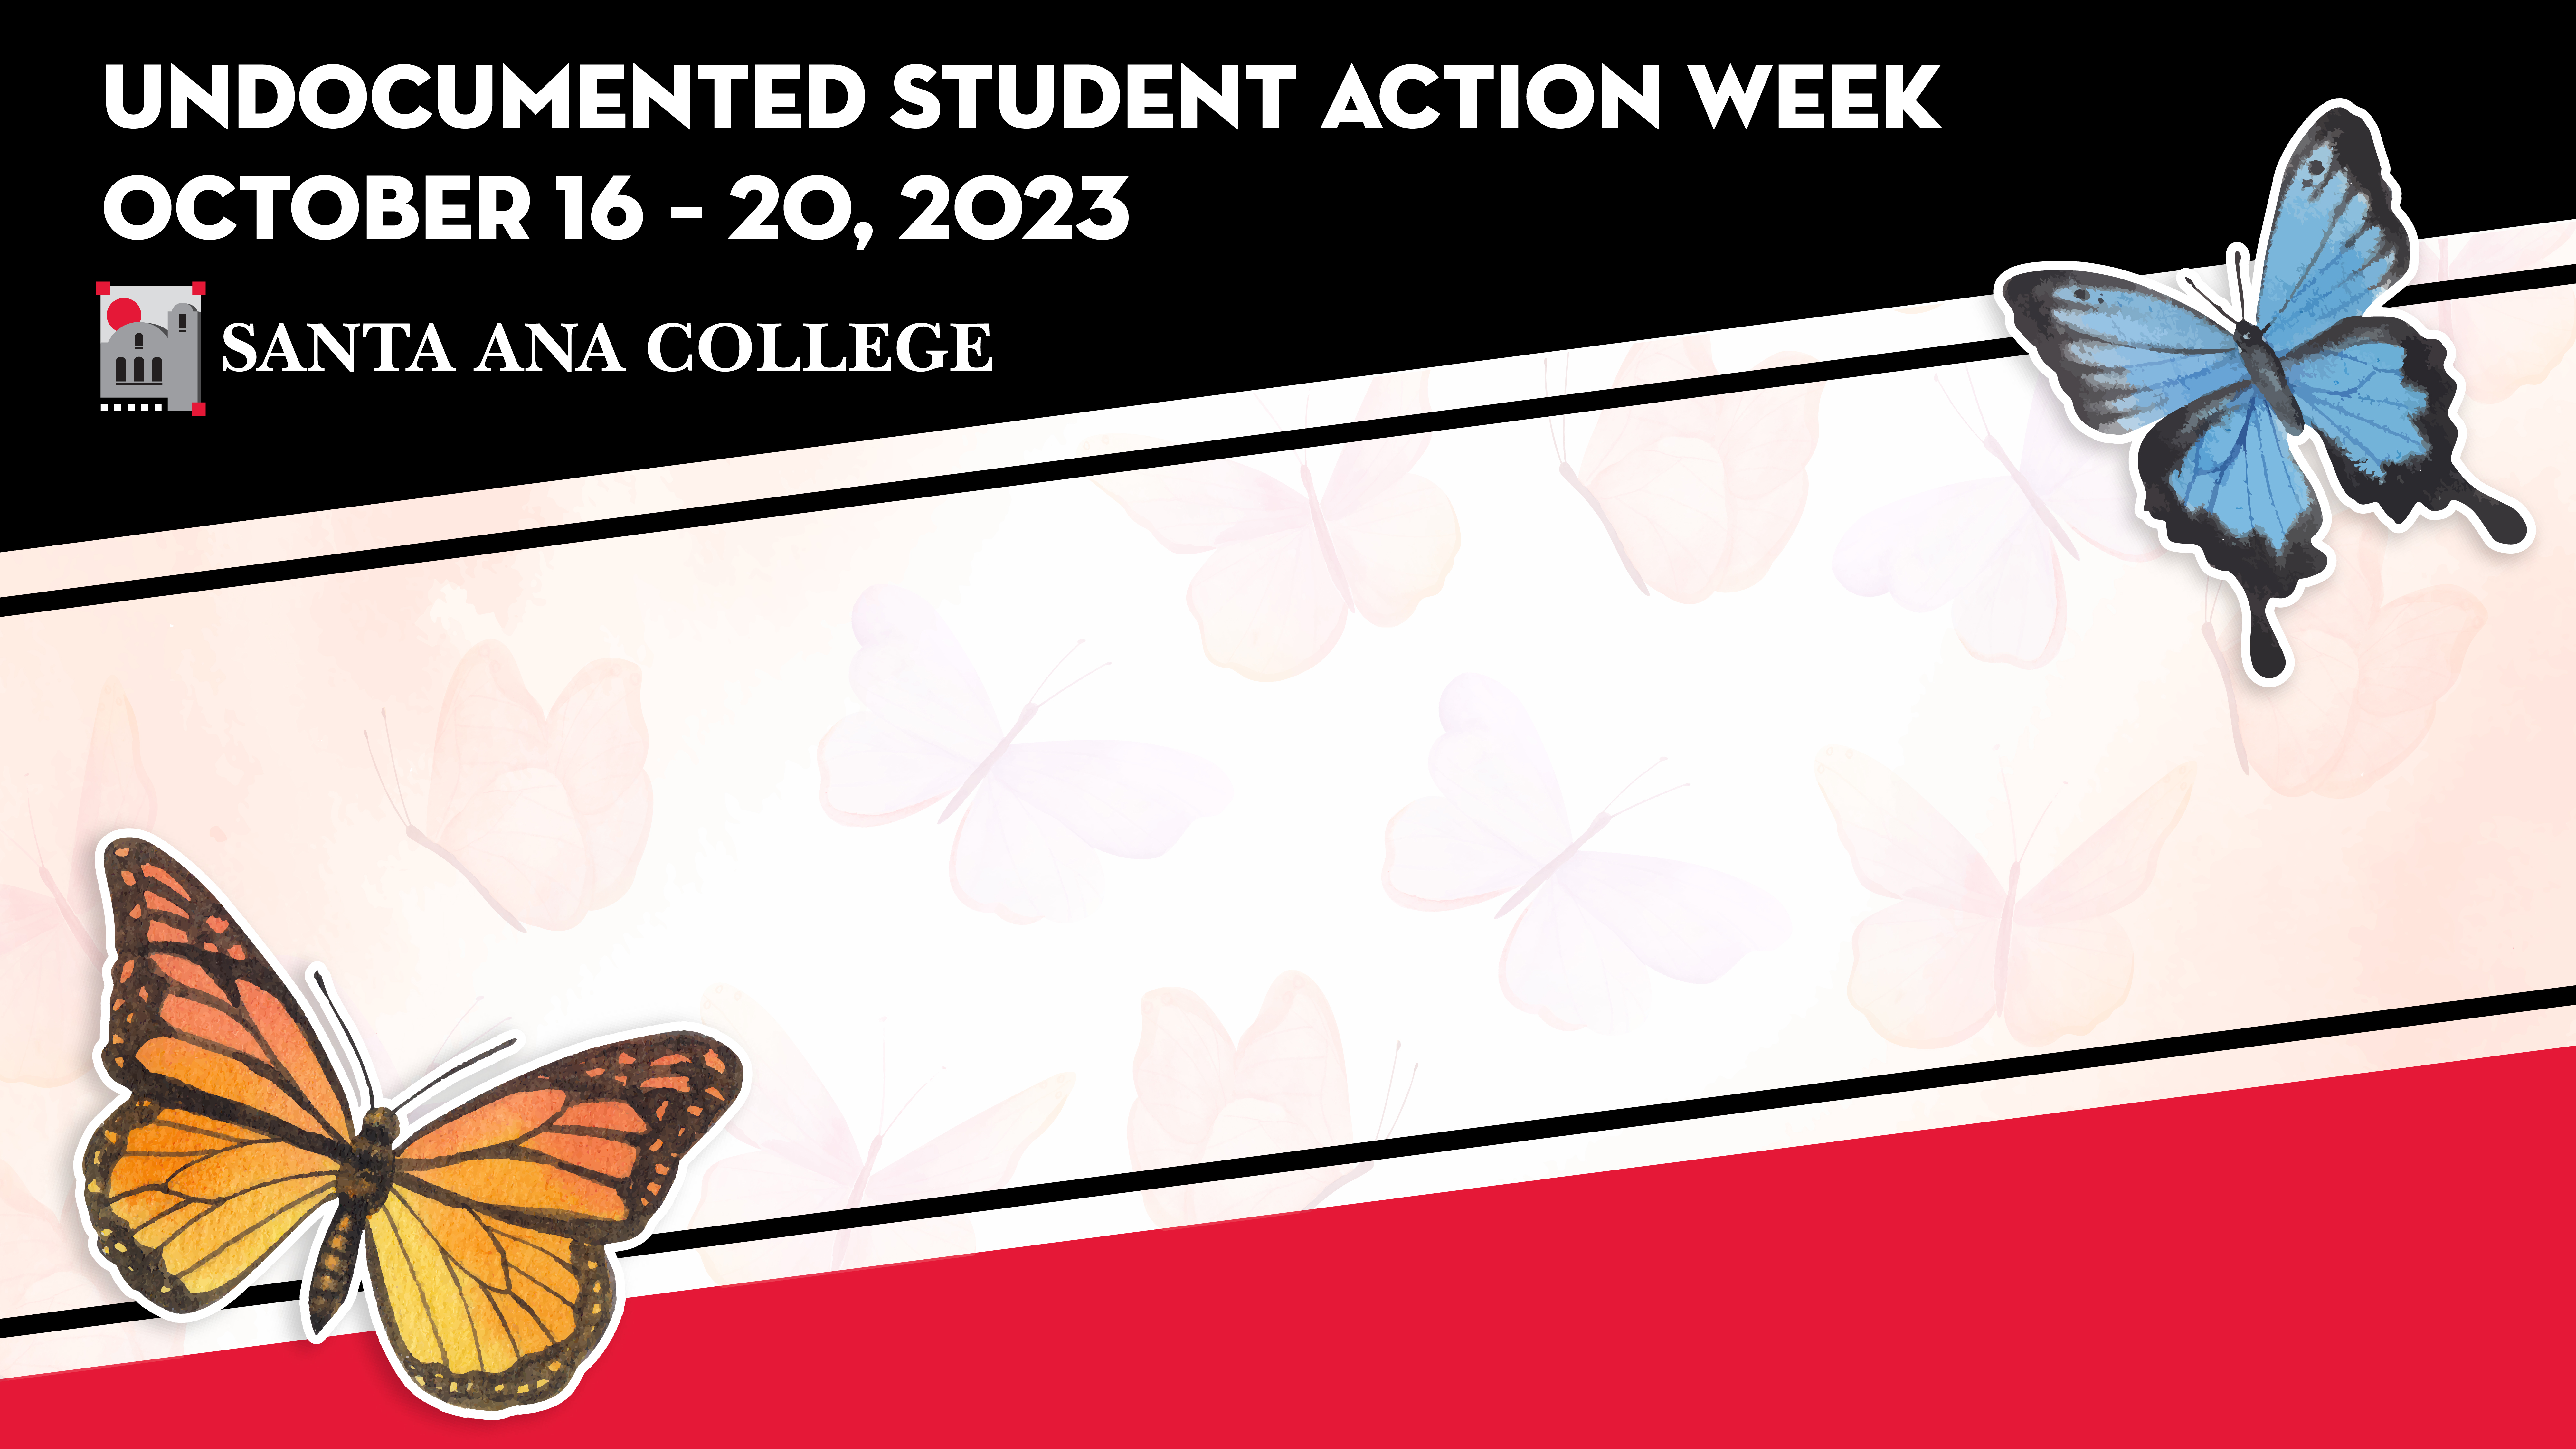 Undocumented student action week